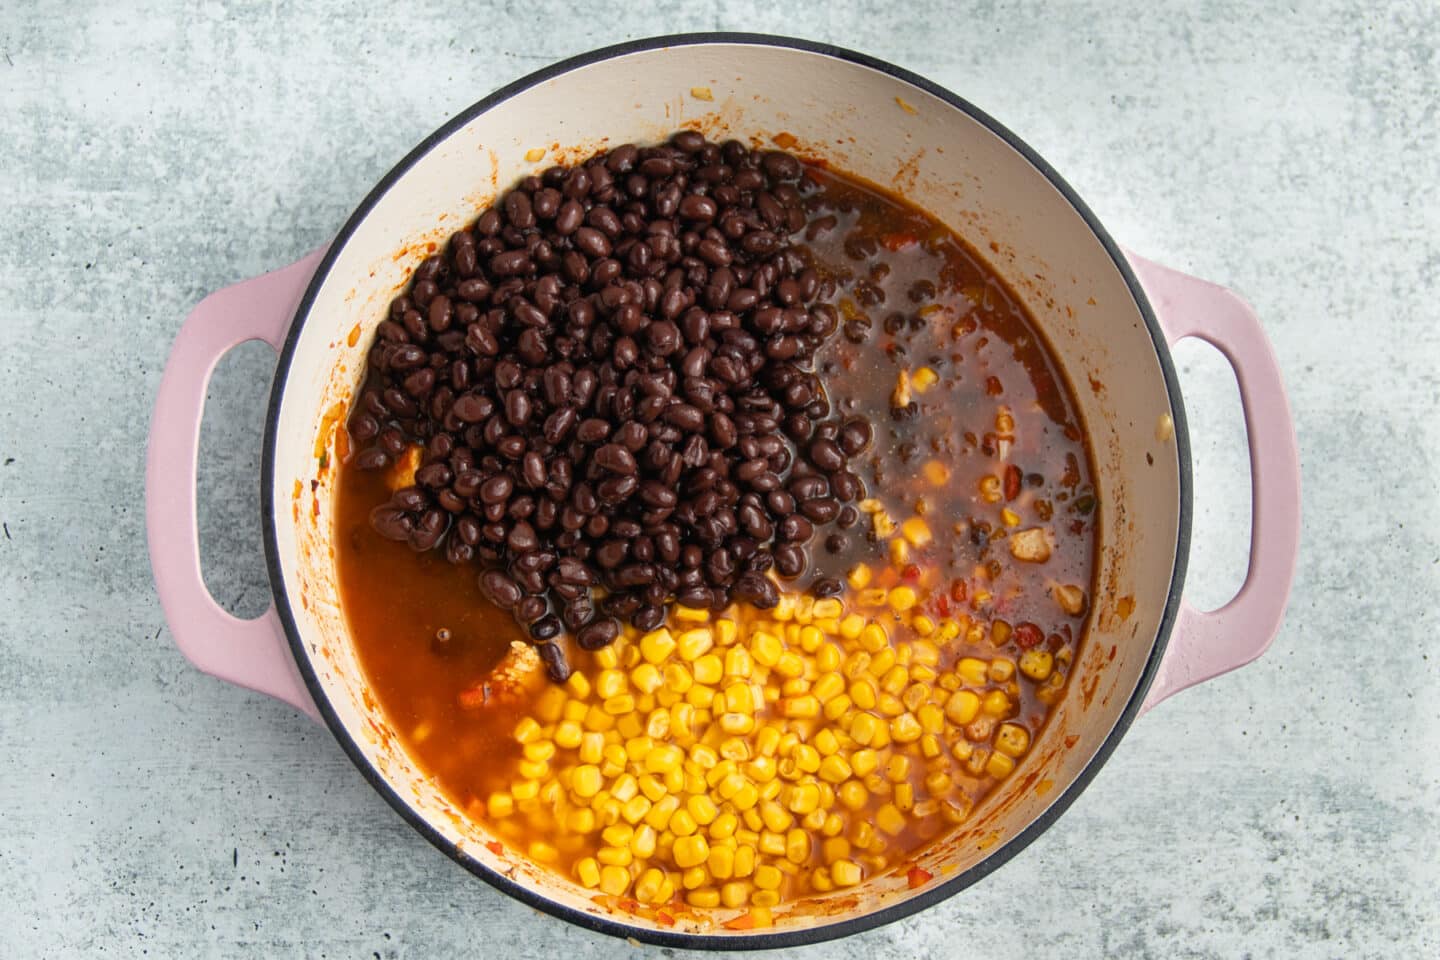 This is a picture of the pot with the the broth, black beans and corn added.